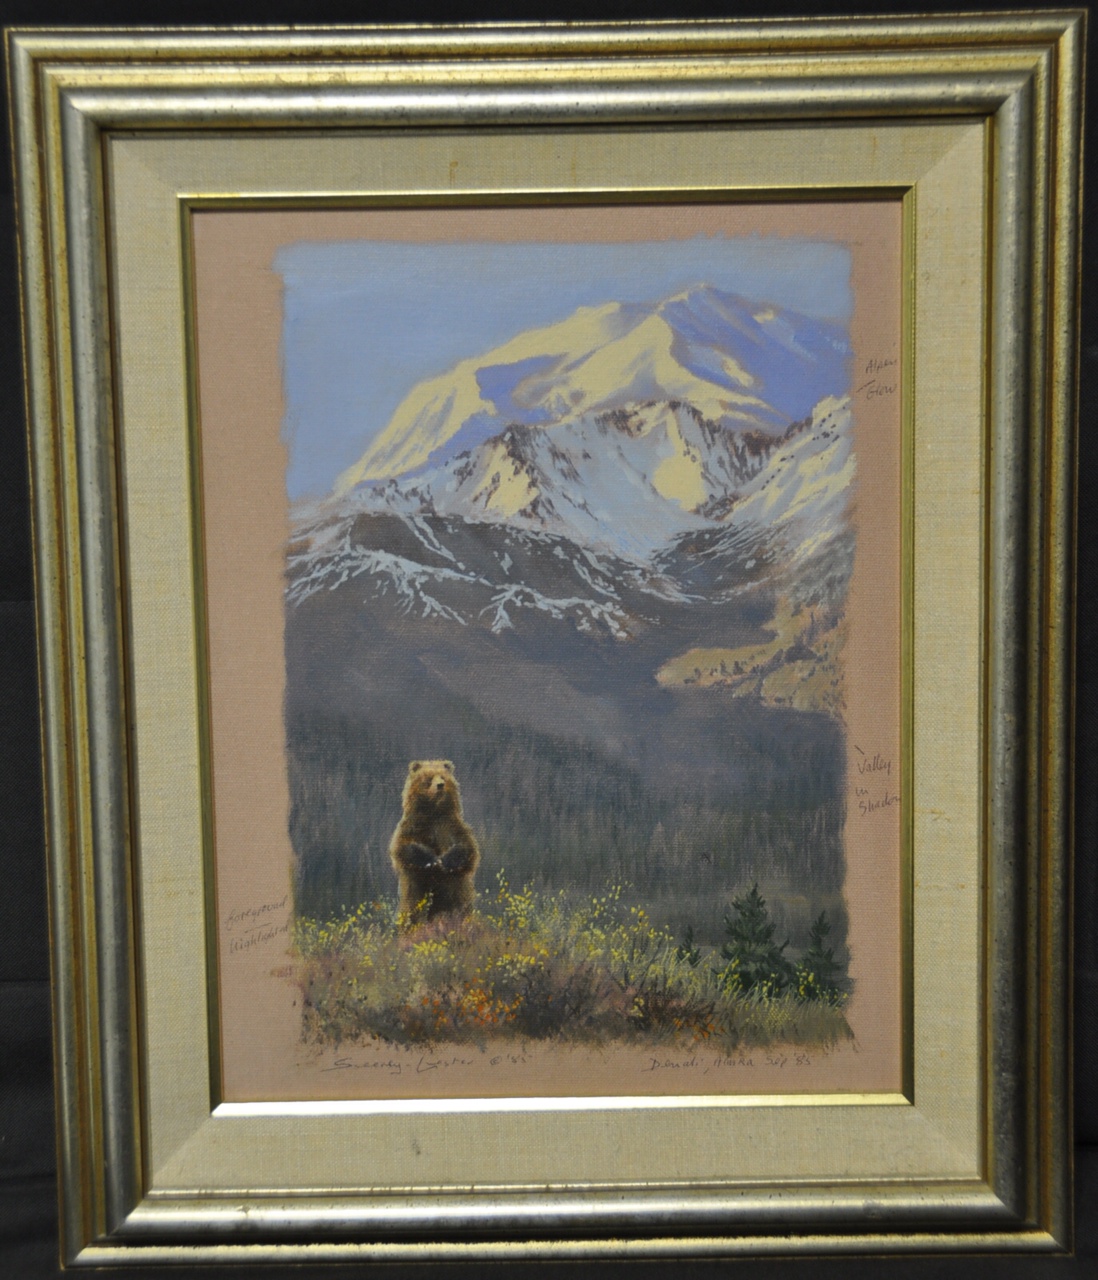 Study for High Country Champion Original Painting by John Seerey-Lester